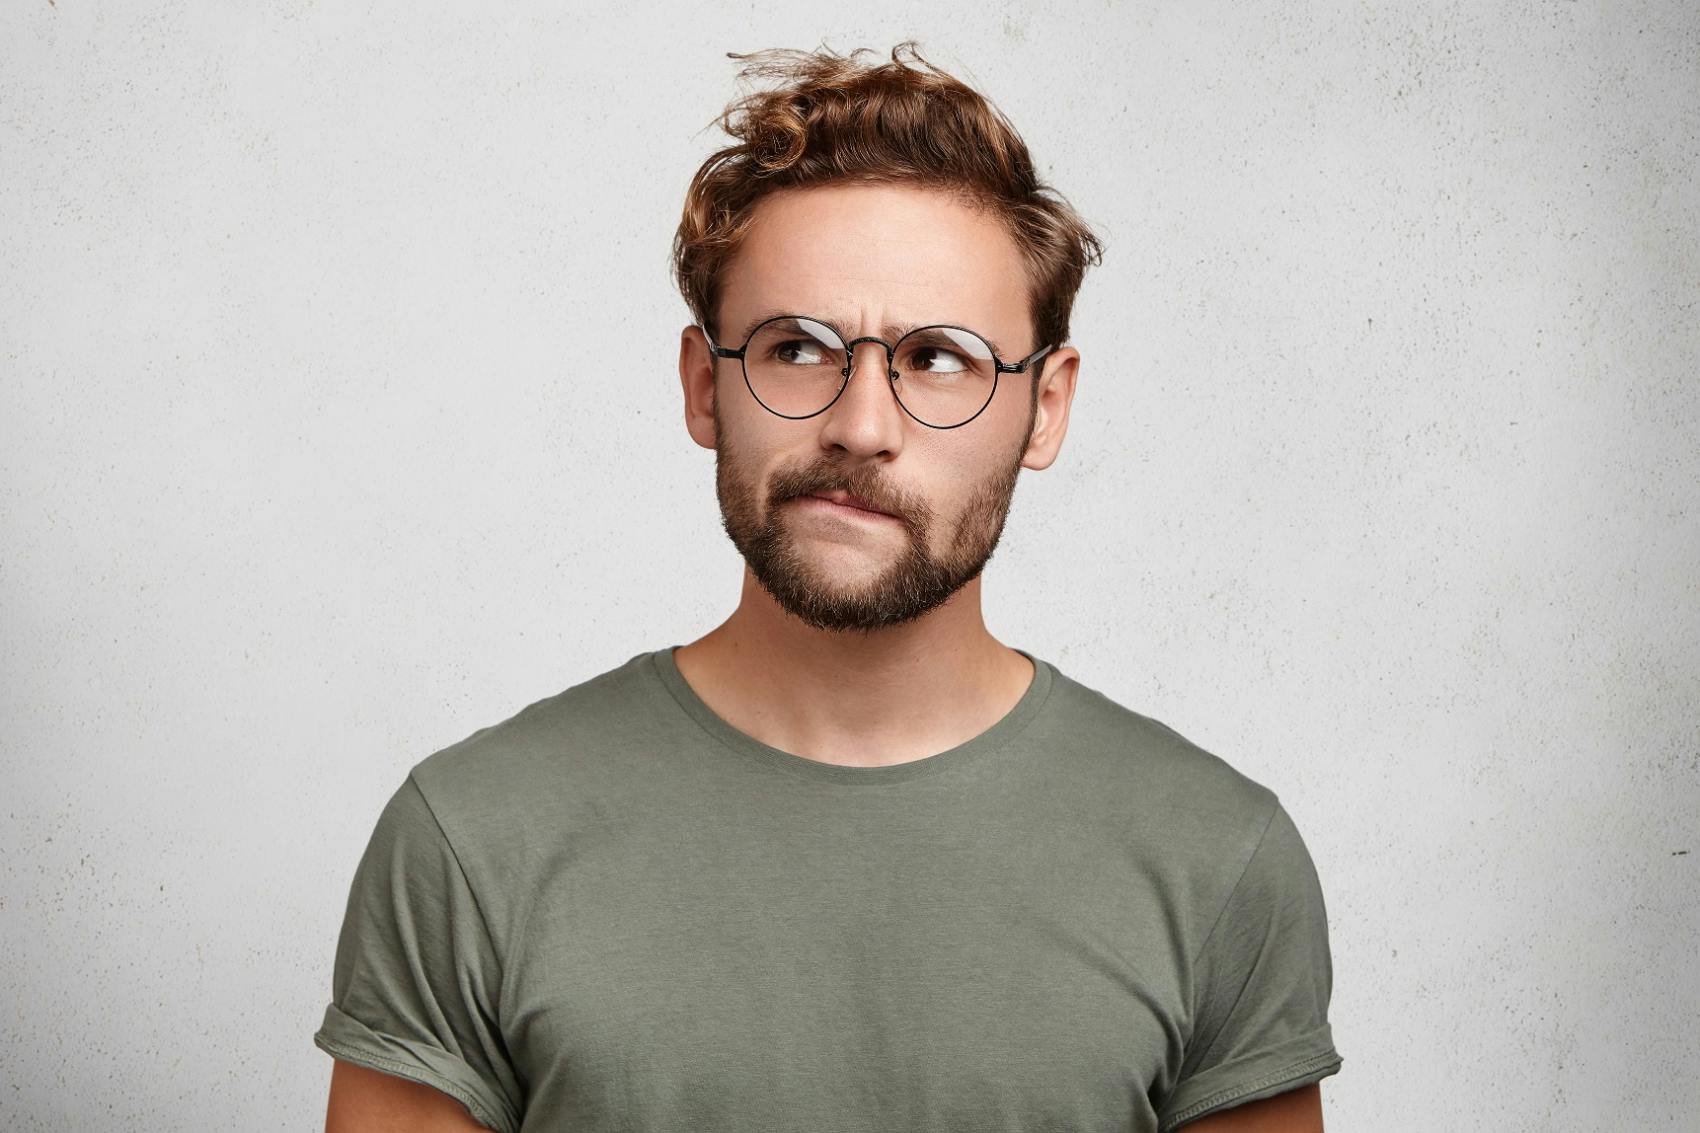 Man in glasses thinking about his hair transplant aftercare